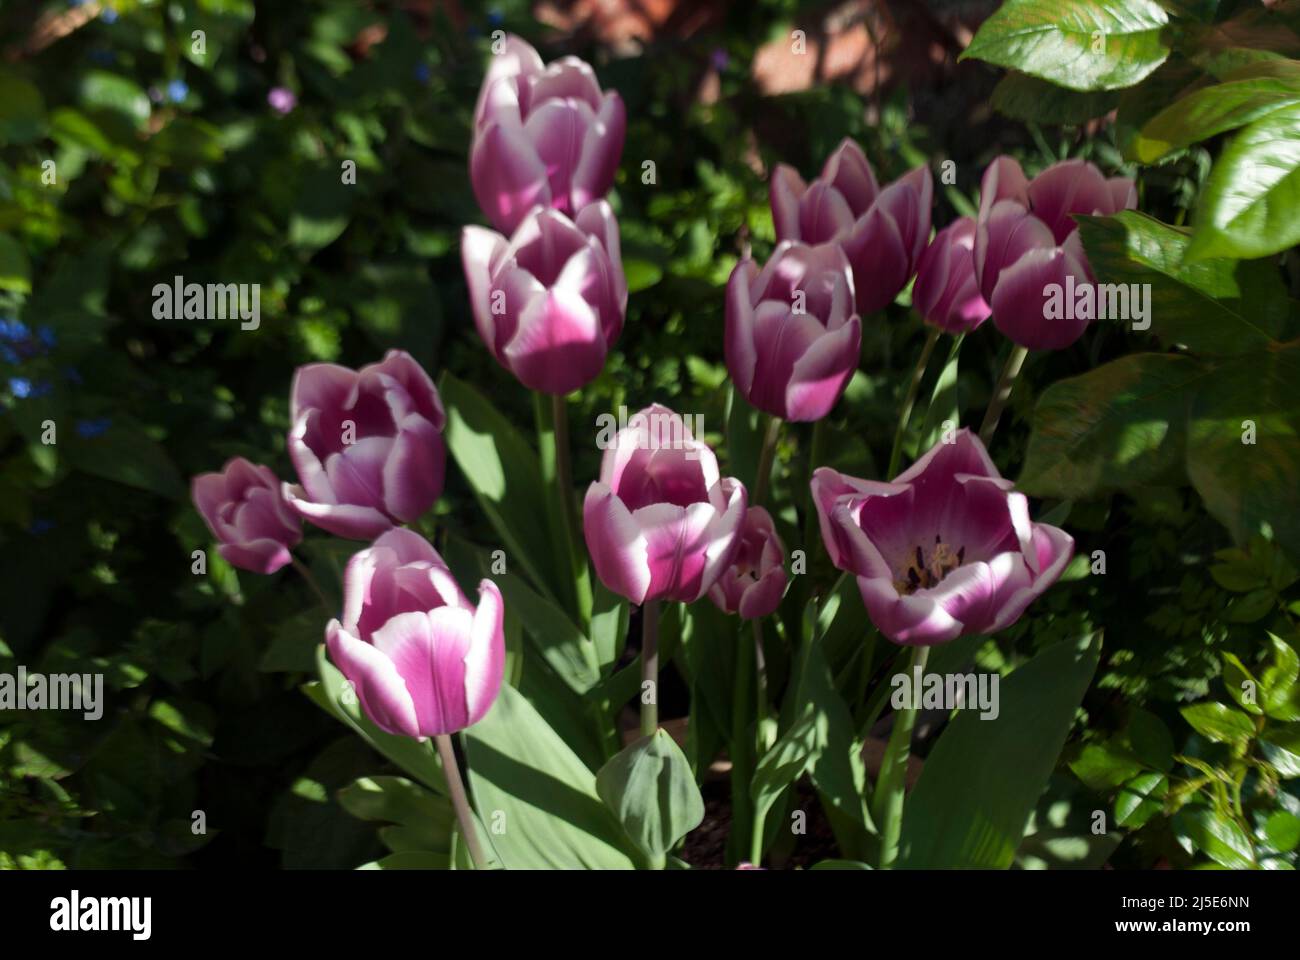 Pink and white variegated tulips against an old brick wall in garden in Ruskington, Sleaford, England, UK Stock Photo